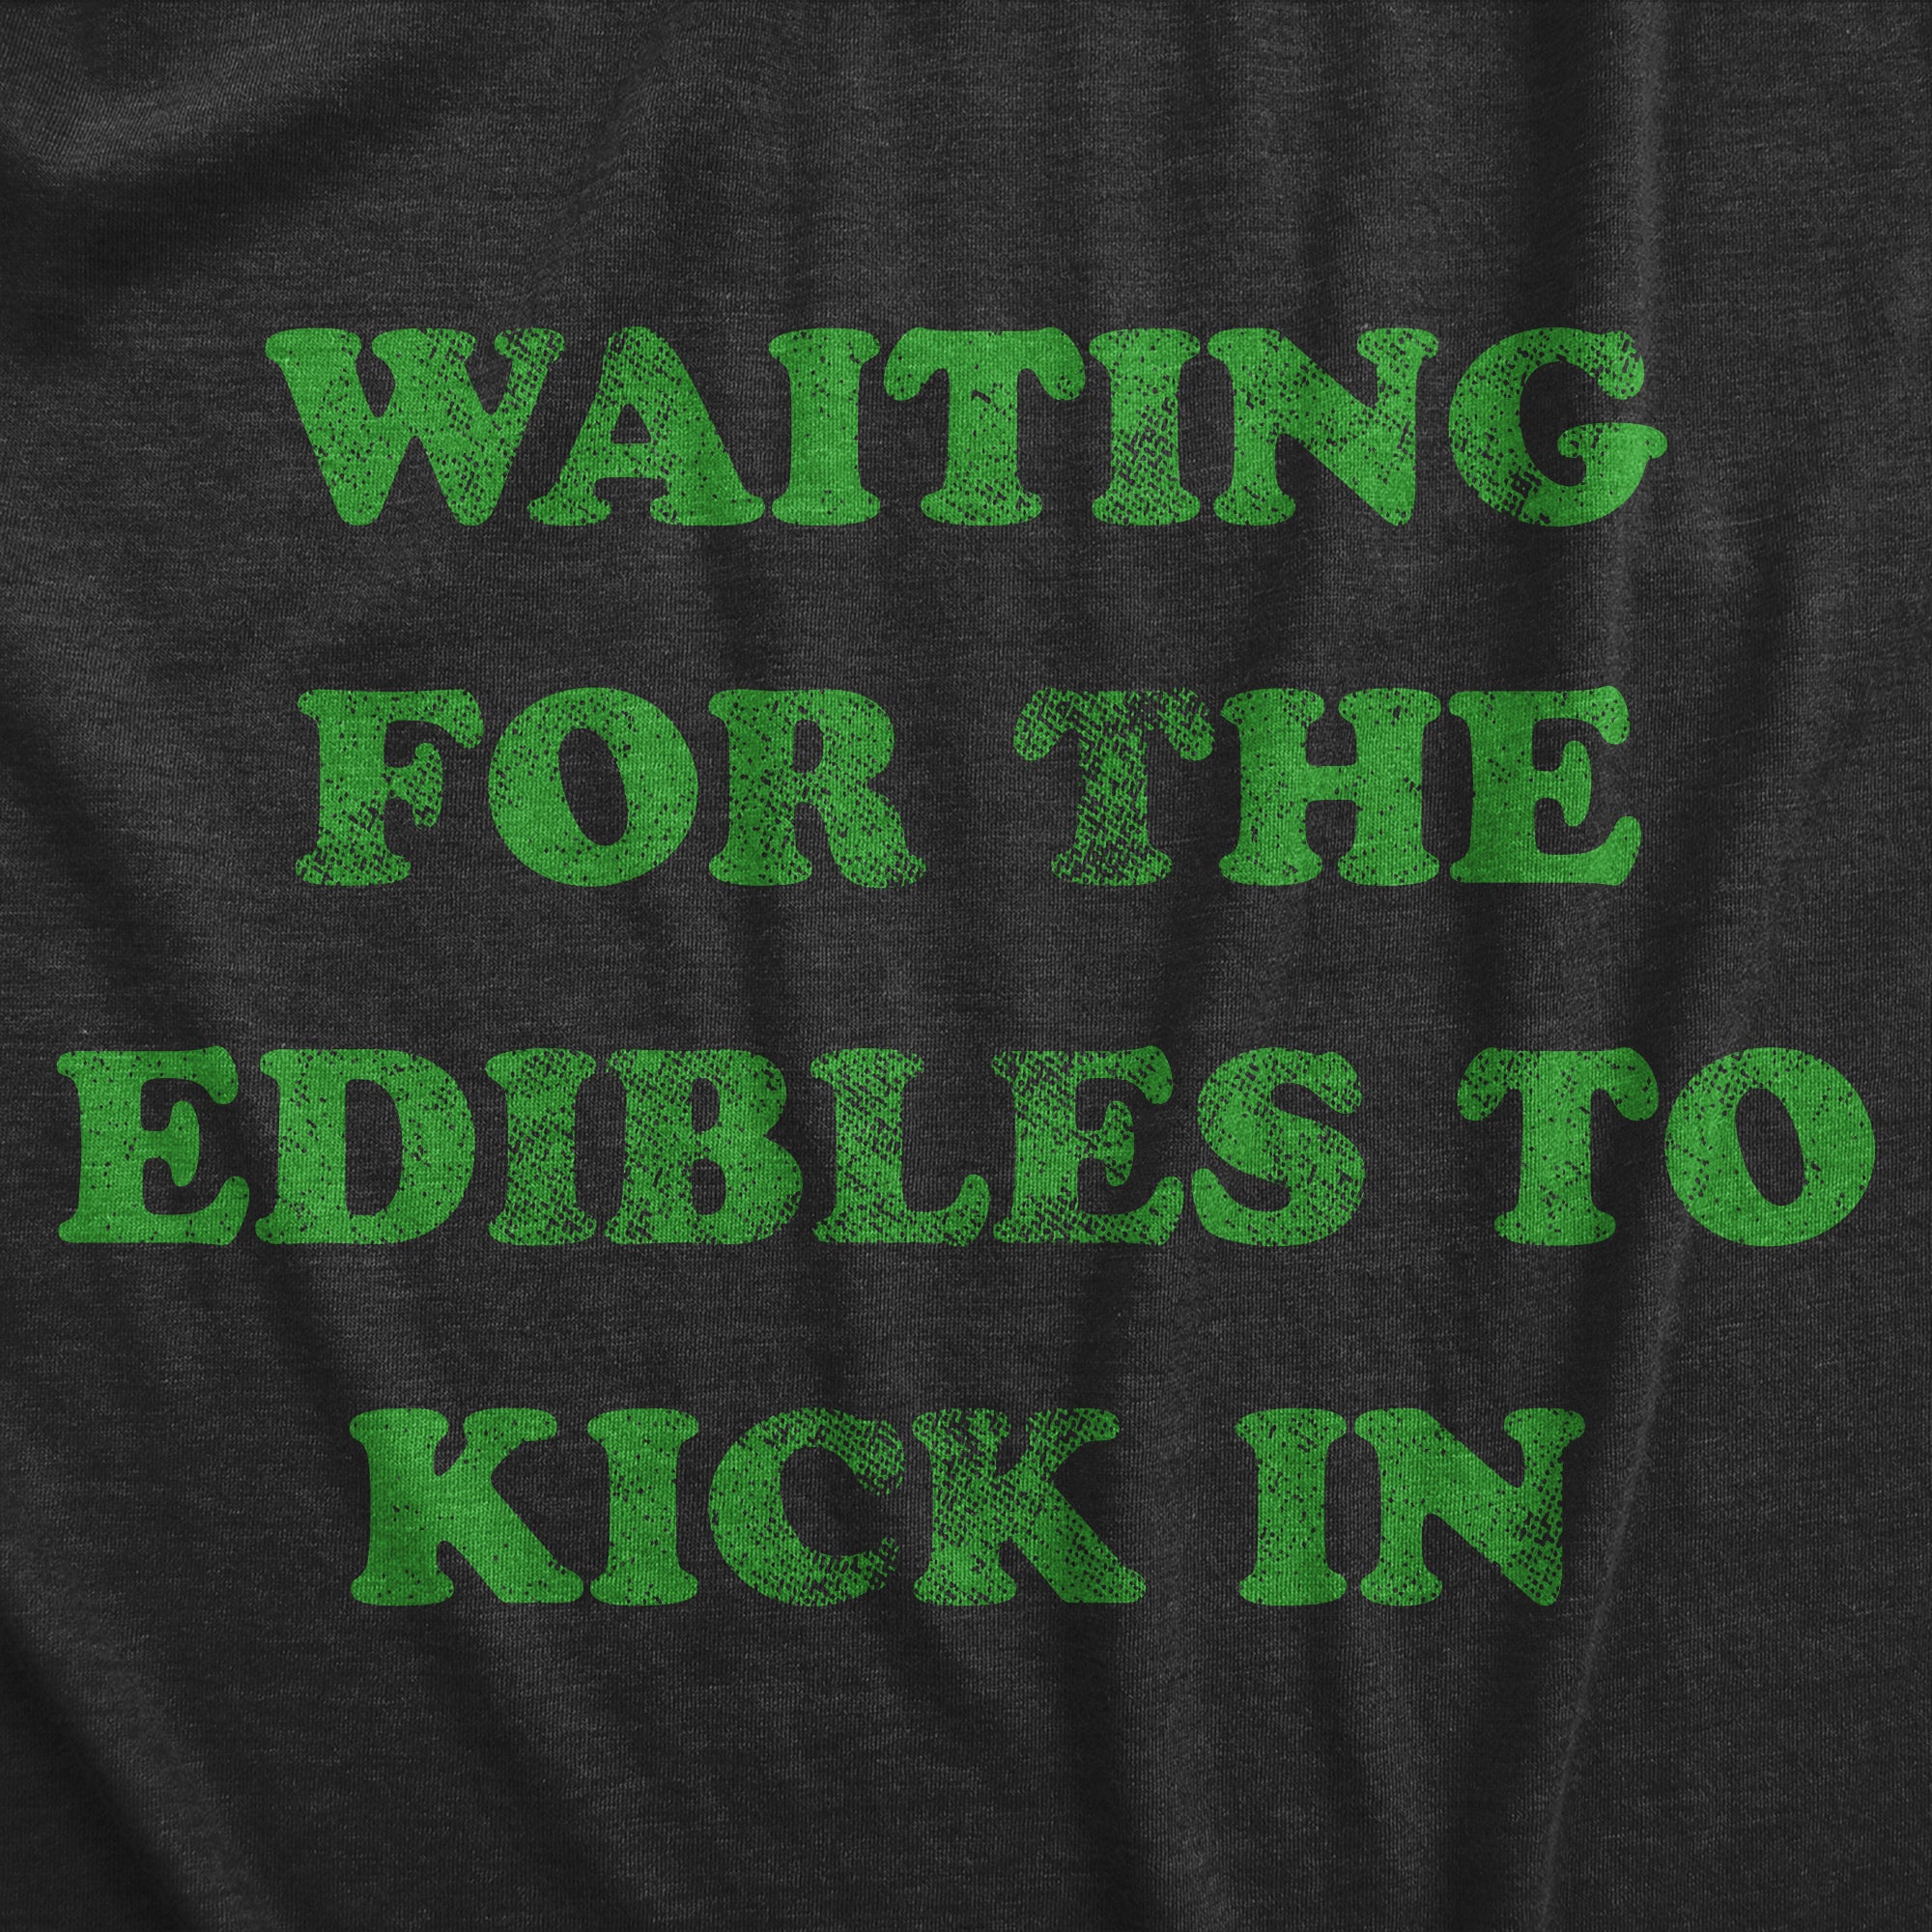 Funny Heather Black - Waiting Edibles Waiting For The Edibles To Kick In Mens T Shirt Nerdy 420 Sarcastic food Tee